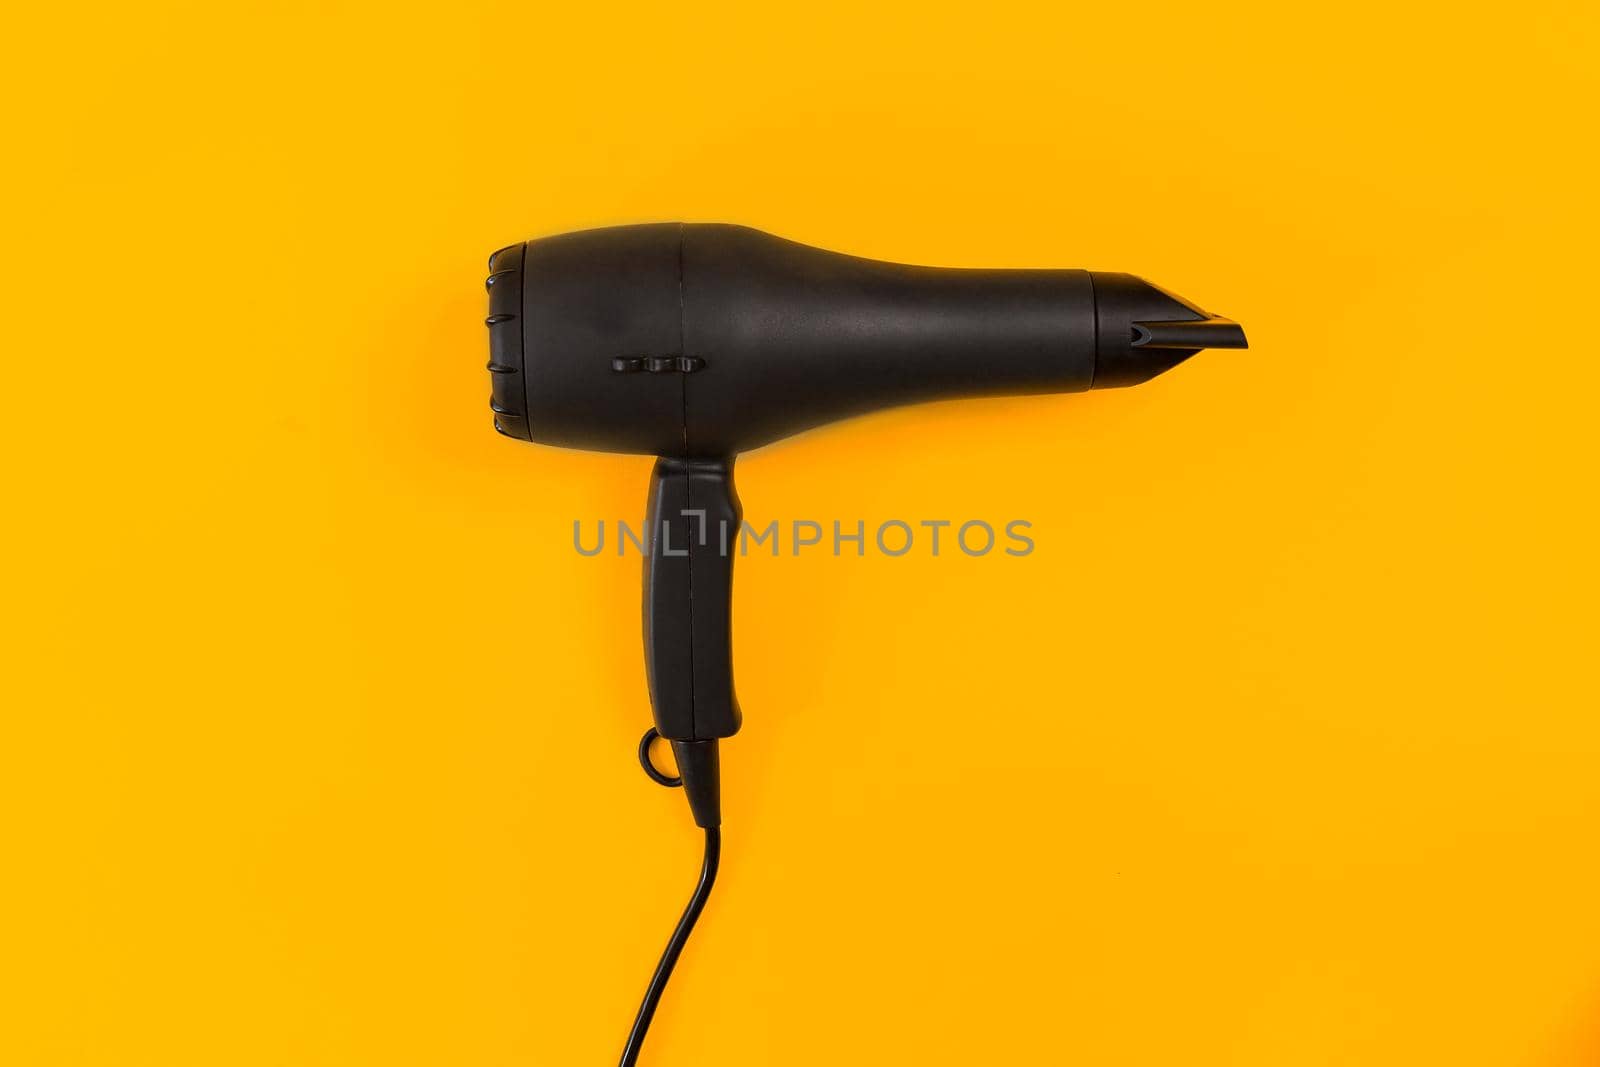 Black Hair dryer on orange background. Top view. Still life. Flat lay. Copy space